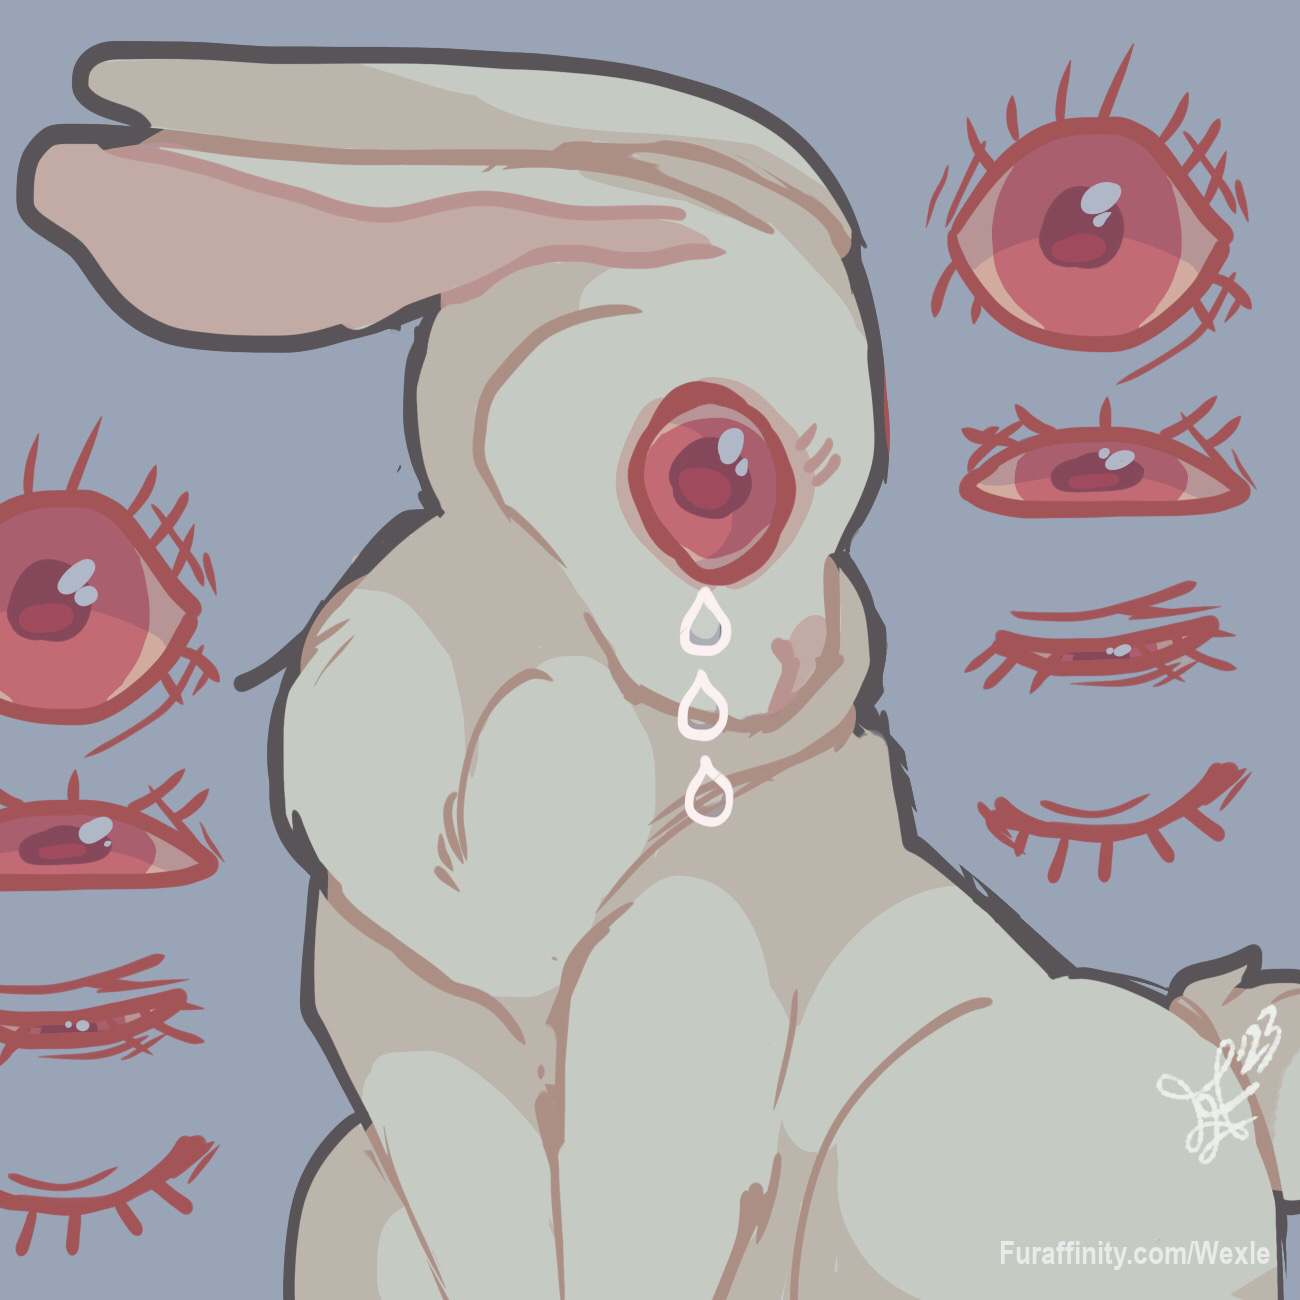 Rabbits have always been a muse for me, here's one I made not too long ago! :^)